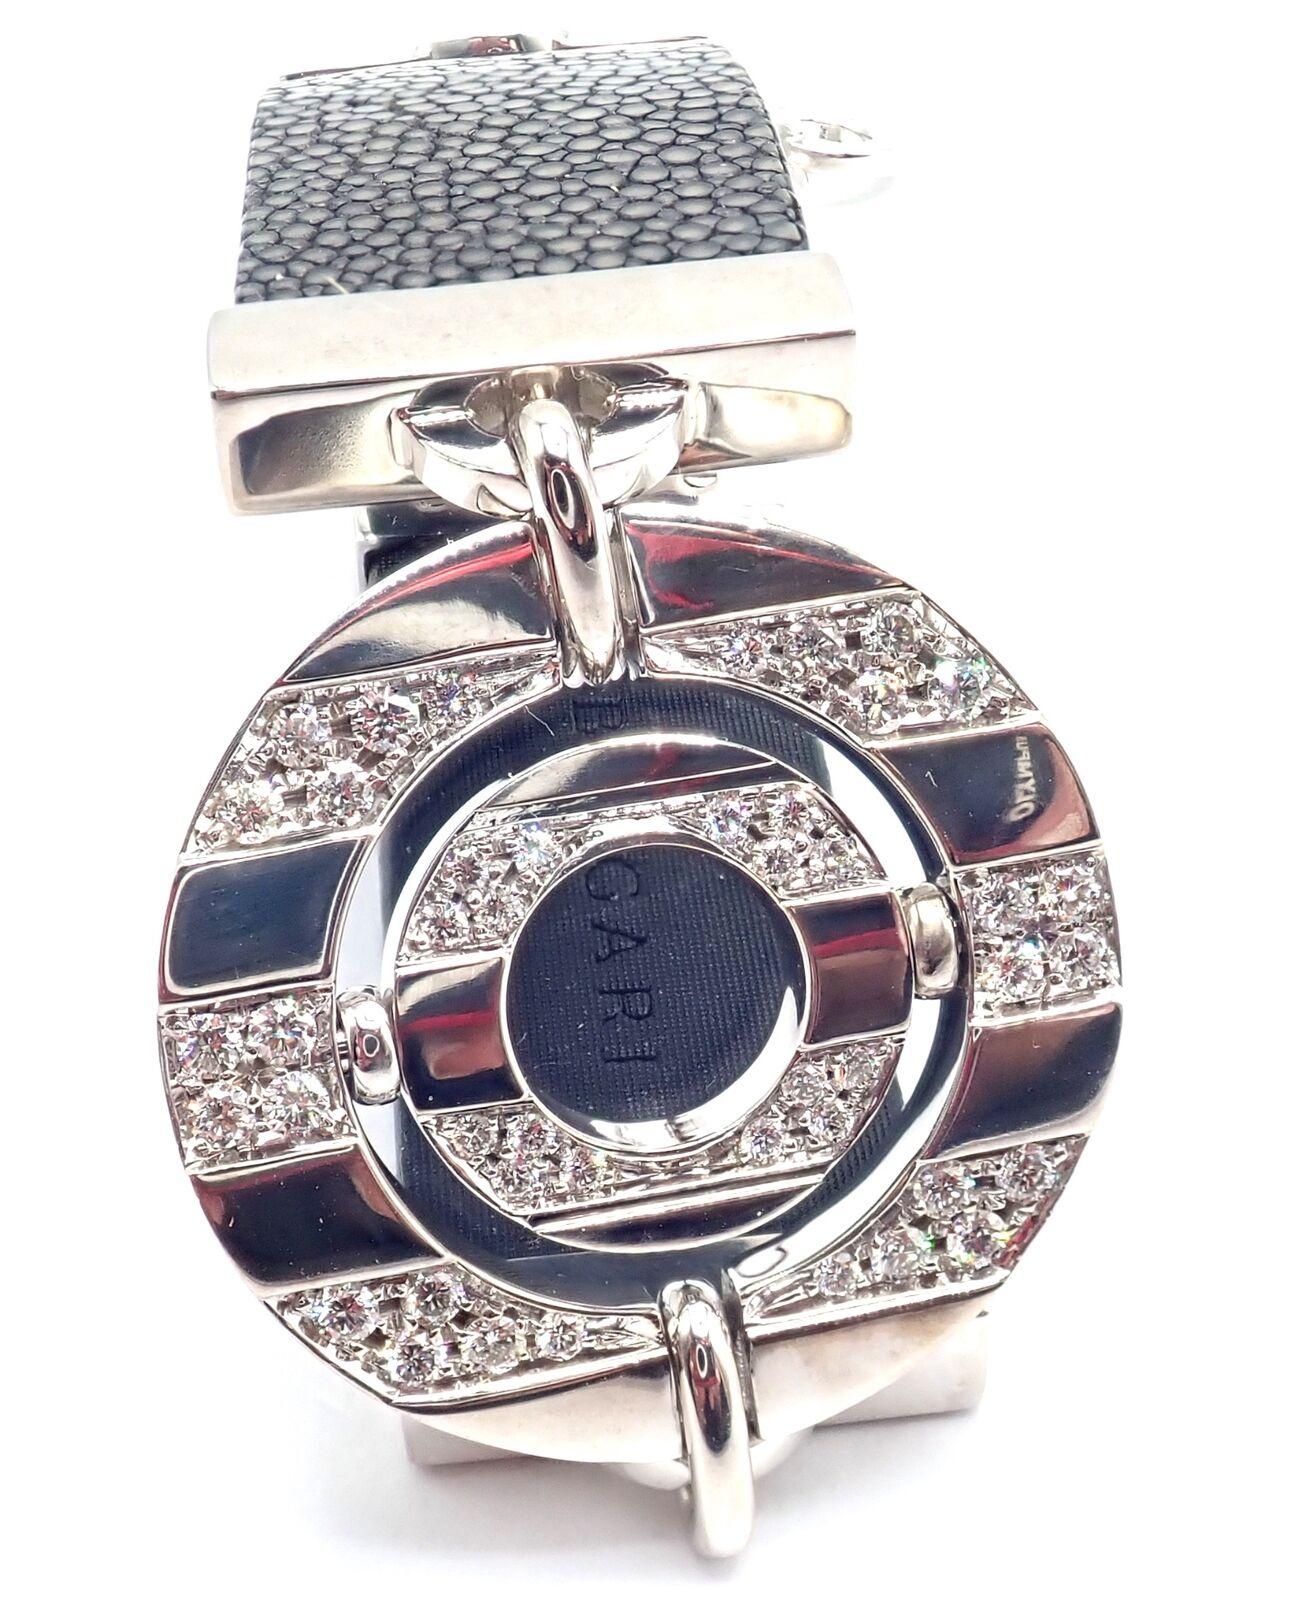 Bvlgari Bulgari Astrale Diamond Shagreen White Gold Bracelet In Excellent Condition For Sale In Holland, PA